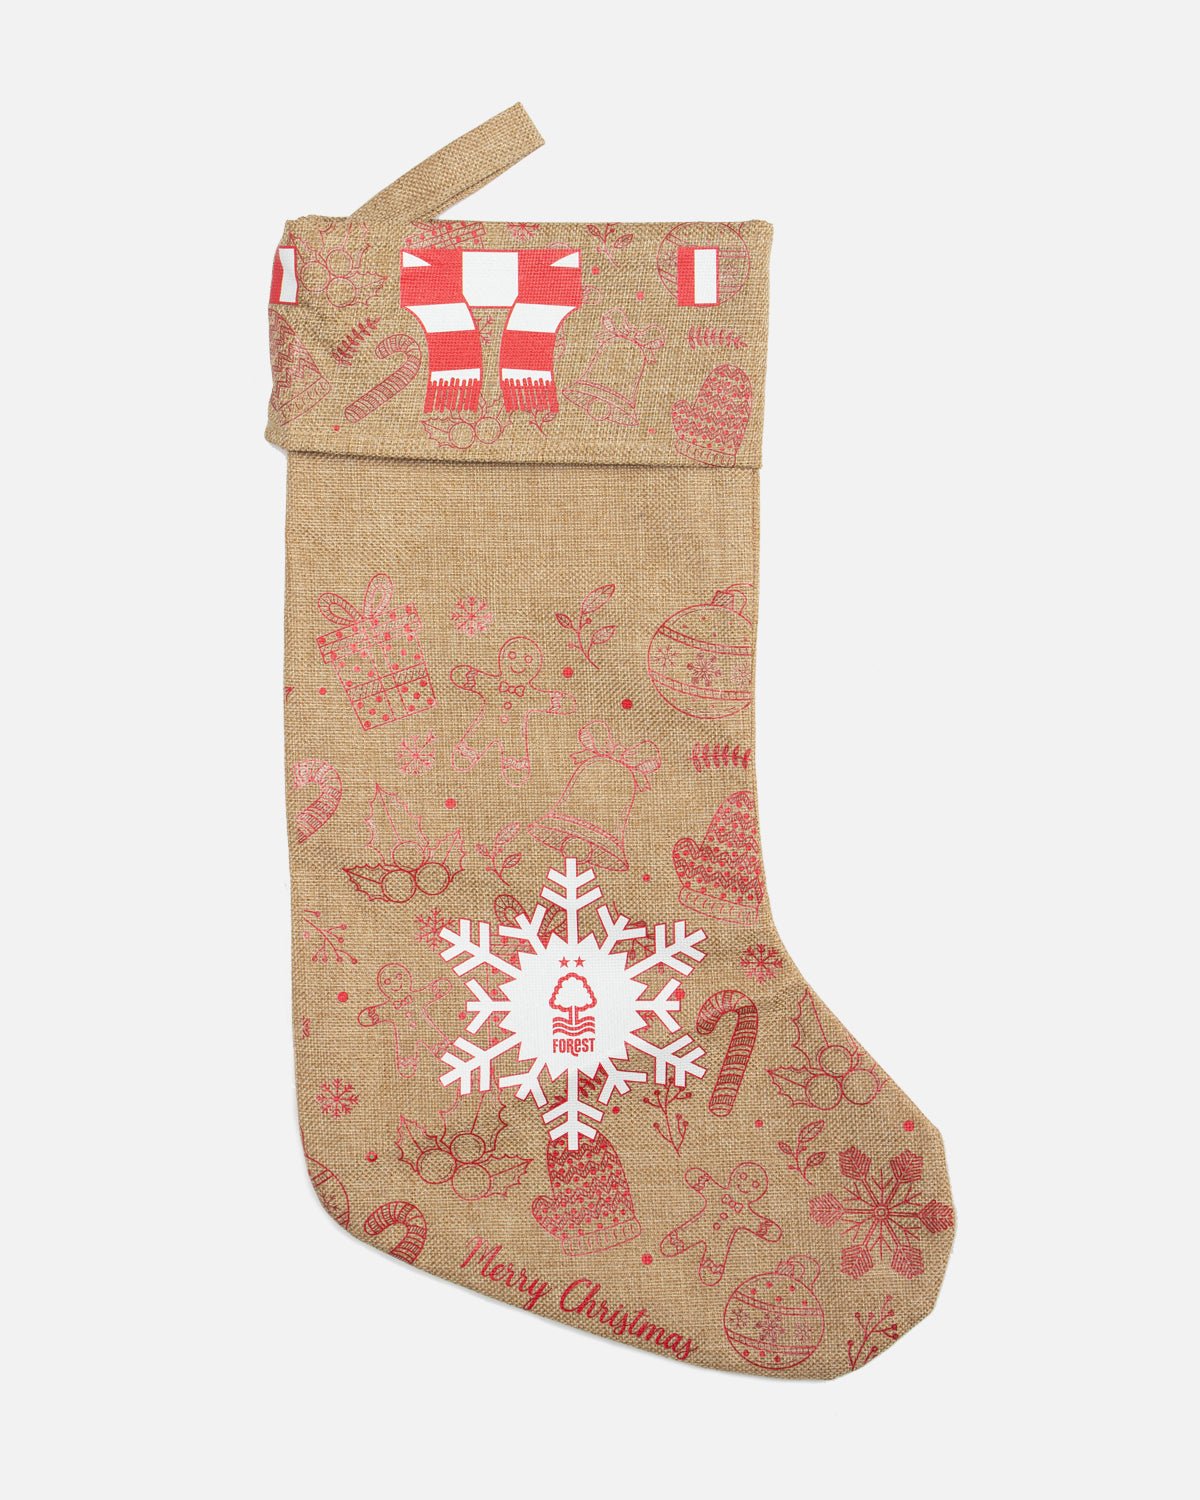 NFFC Hessian Christmas Stocking - Nottingham Forest FC